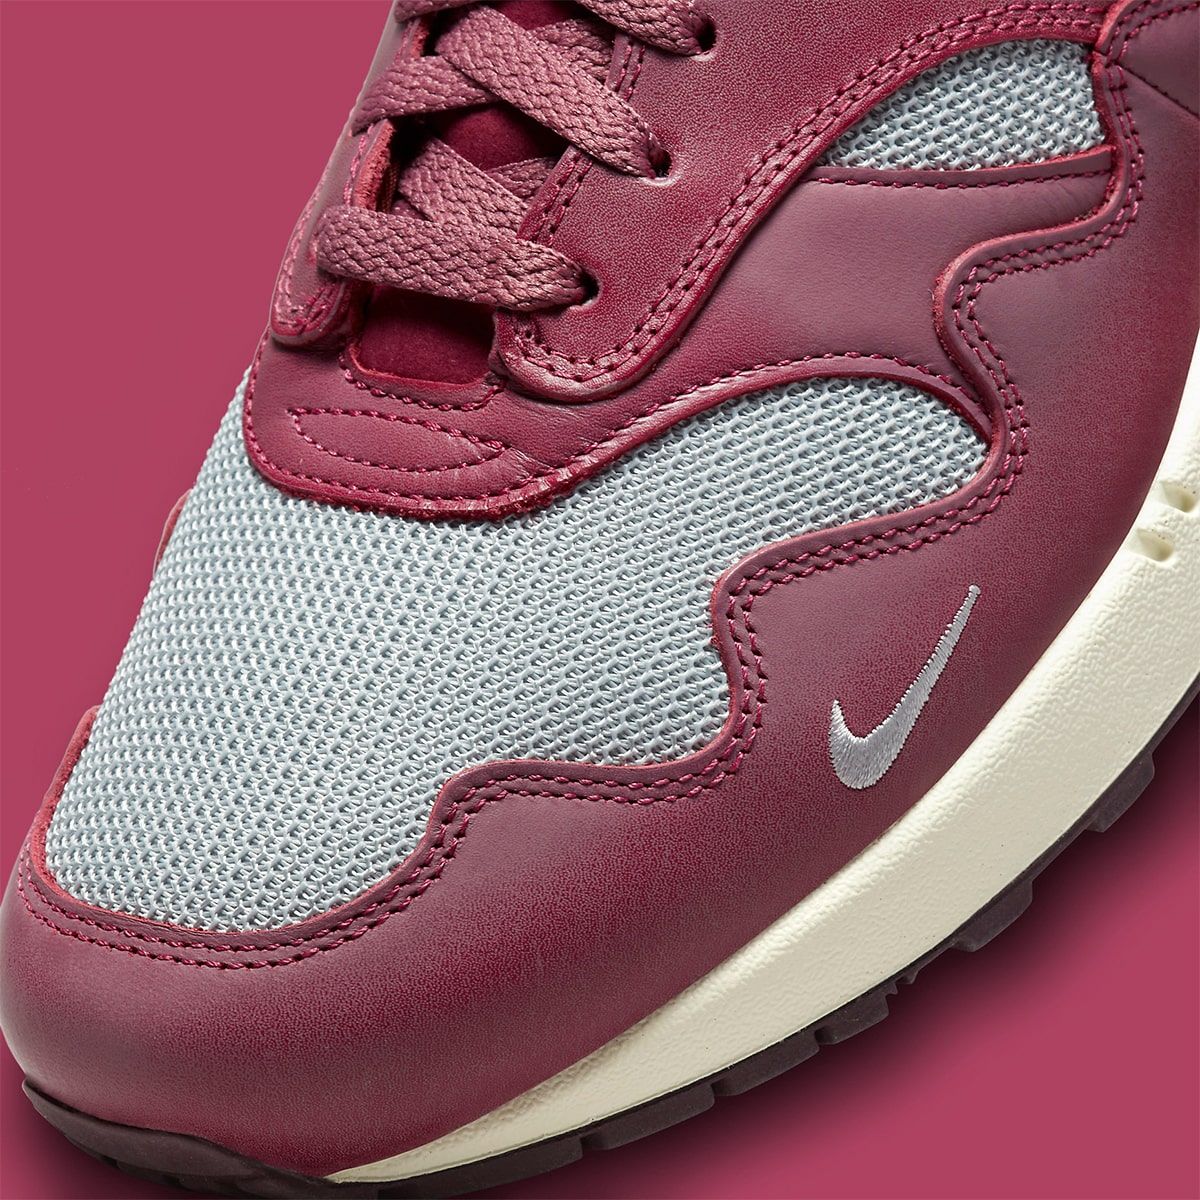 Where to Buy the Patta x Nike Air Max 1 “Night Maroon” | House of